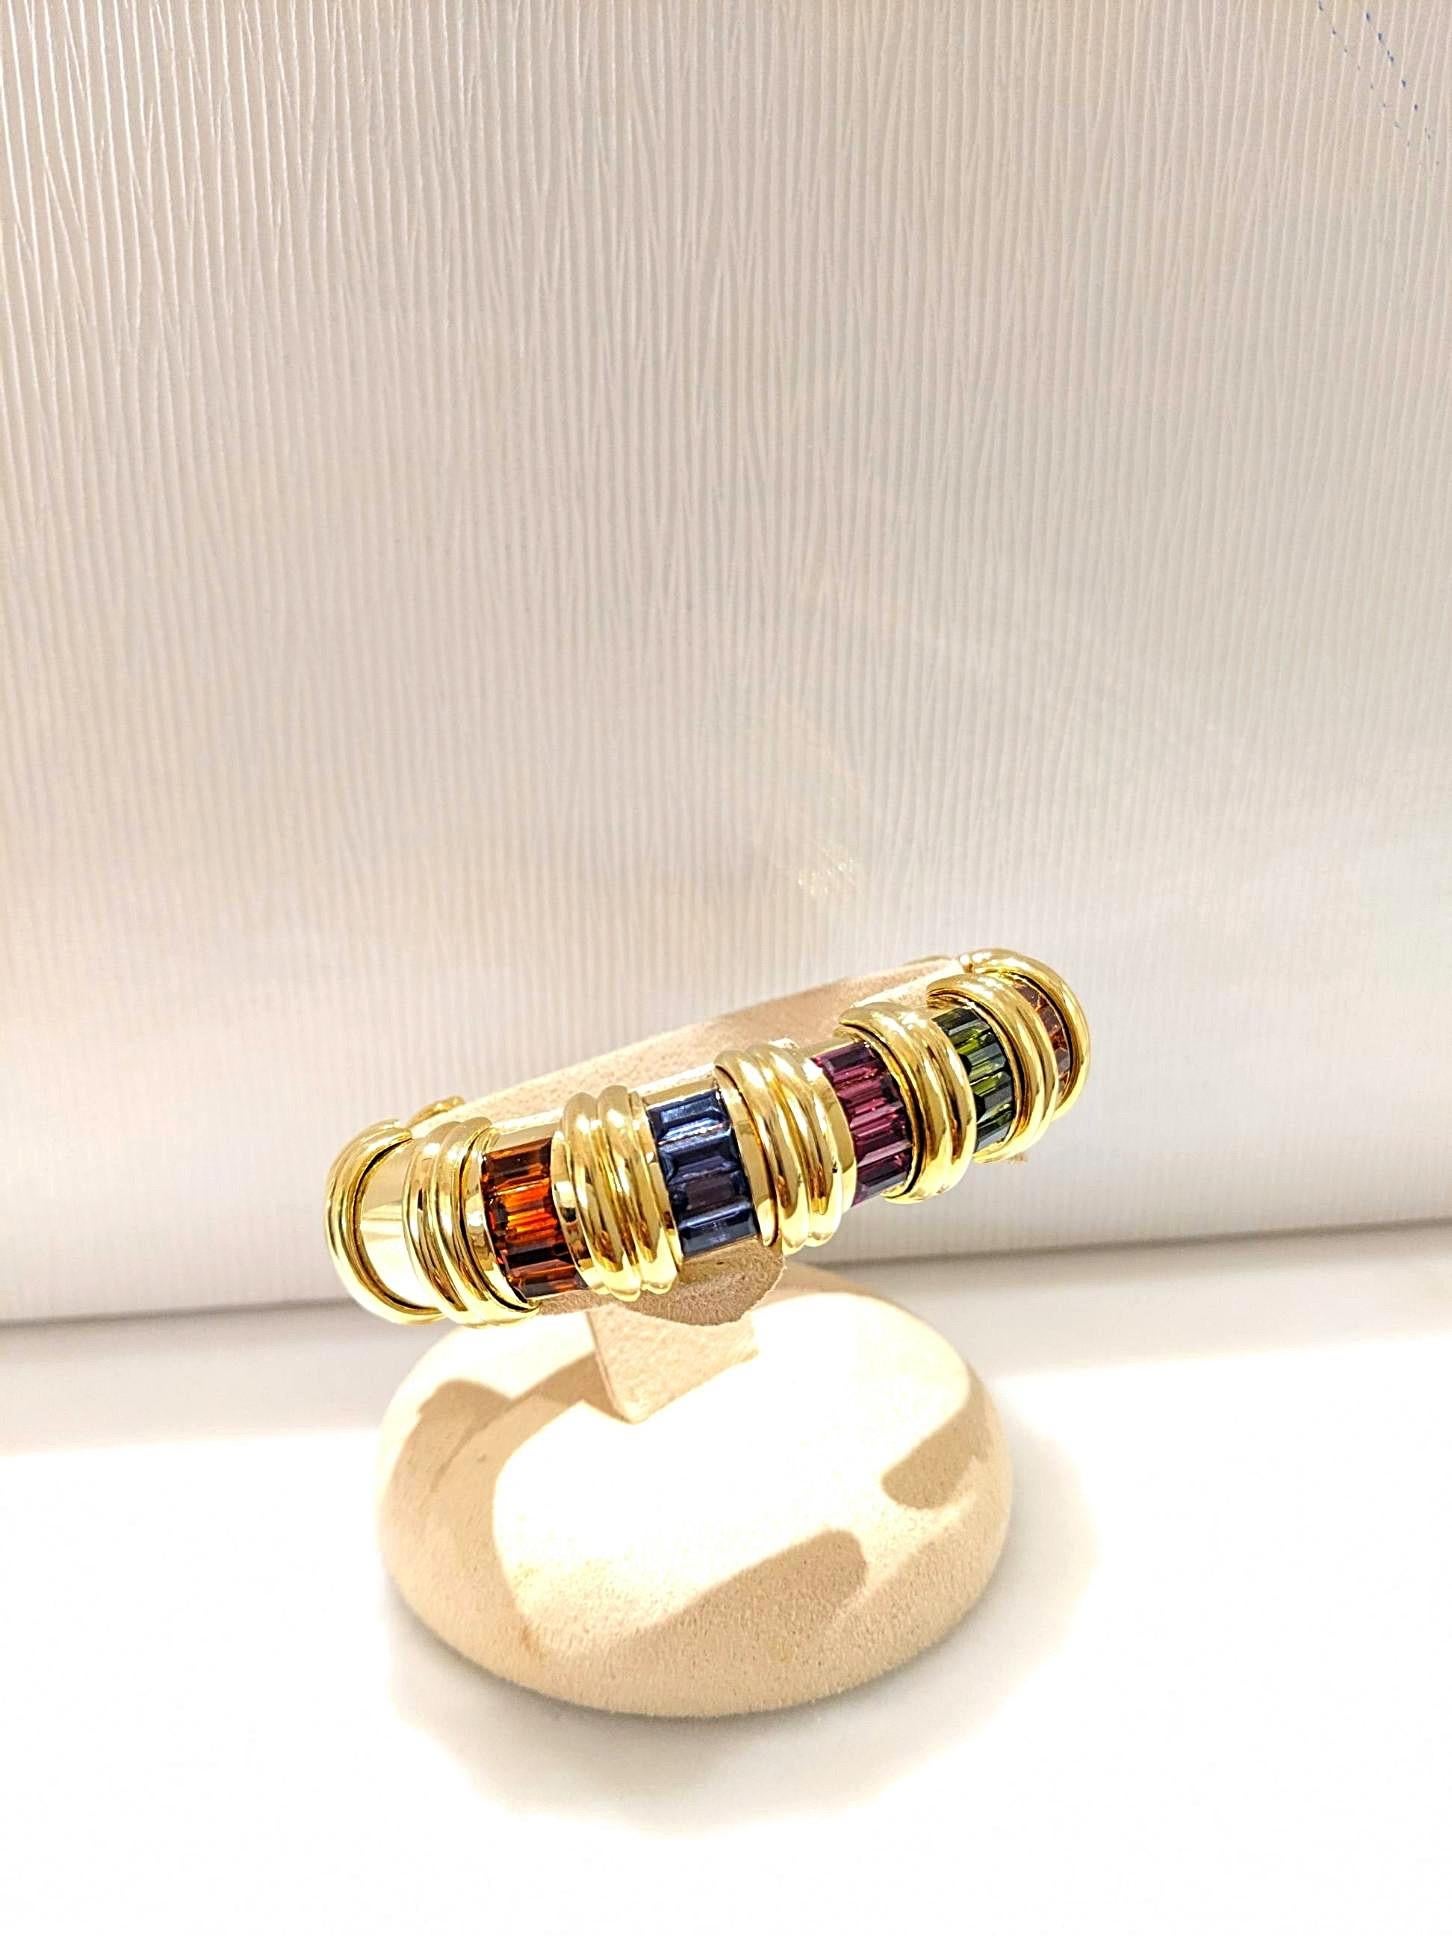 This elegant bangle bracelet from designer Jeffrey Stevens rainbow collection is crafted in 18KT Yellow Gold. This stylish bangle bracelet is composed of 6 sections of invisibly set baguette cut semiprecious gemstones, Including Amethyst, Citrine,